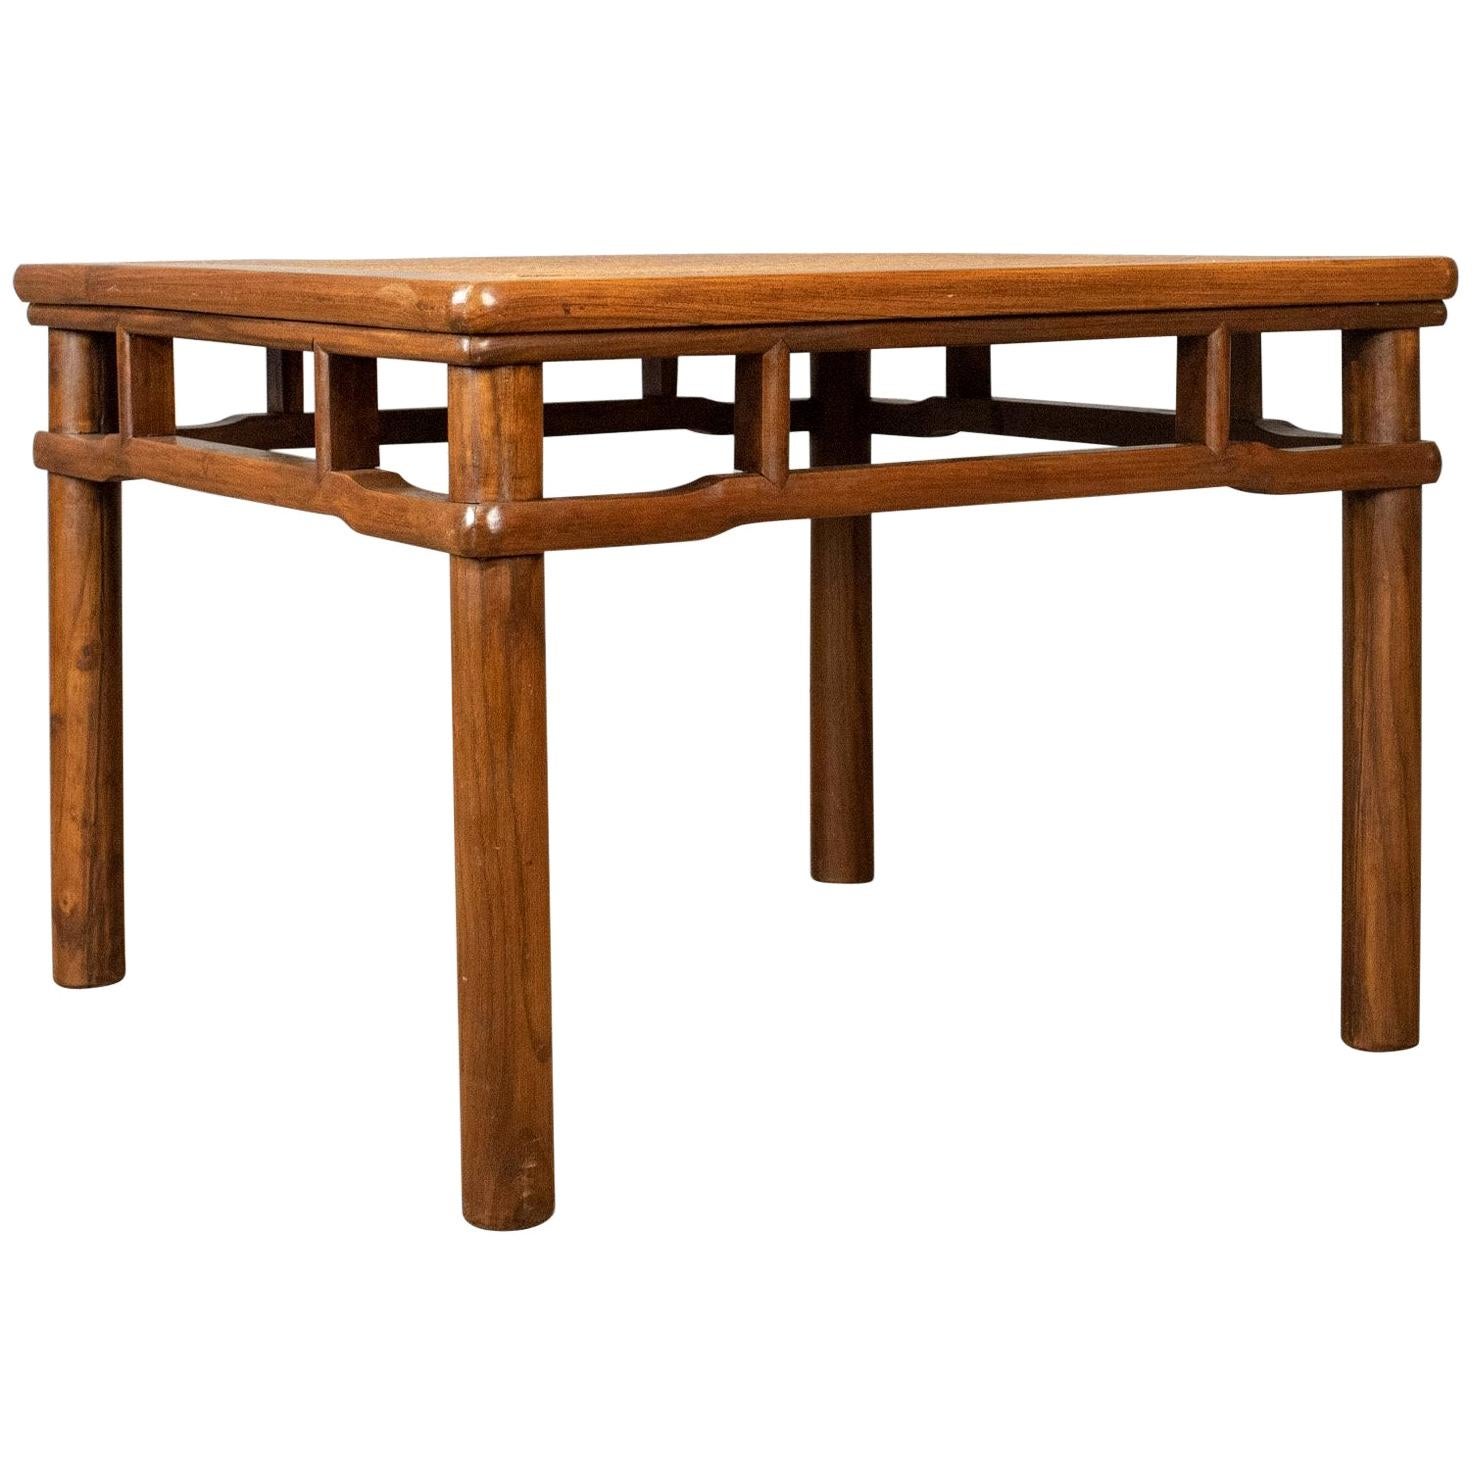 Chinese Elm and Rattan Coffee Table, Side, Lamp, Late 20th Century For Sale